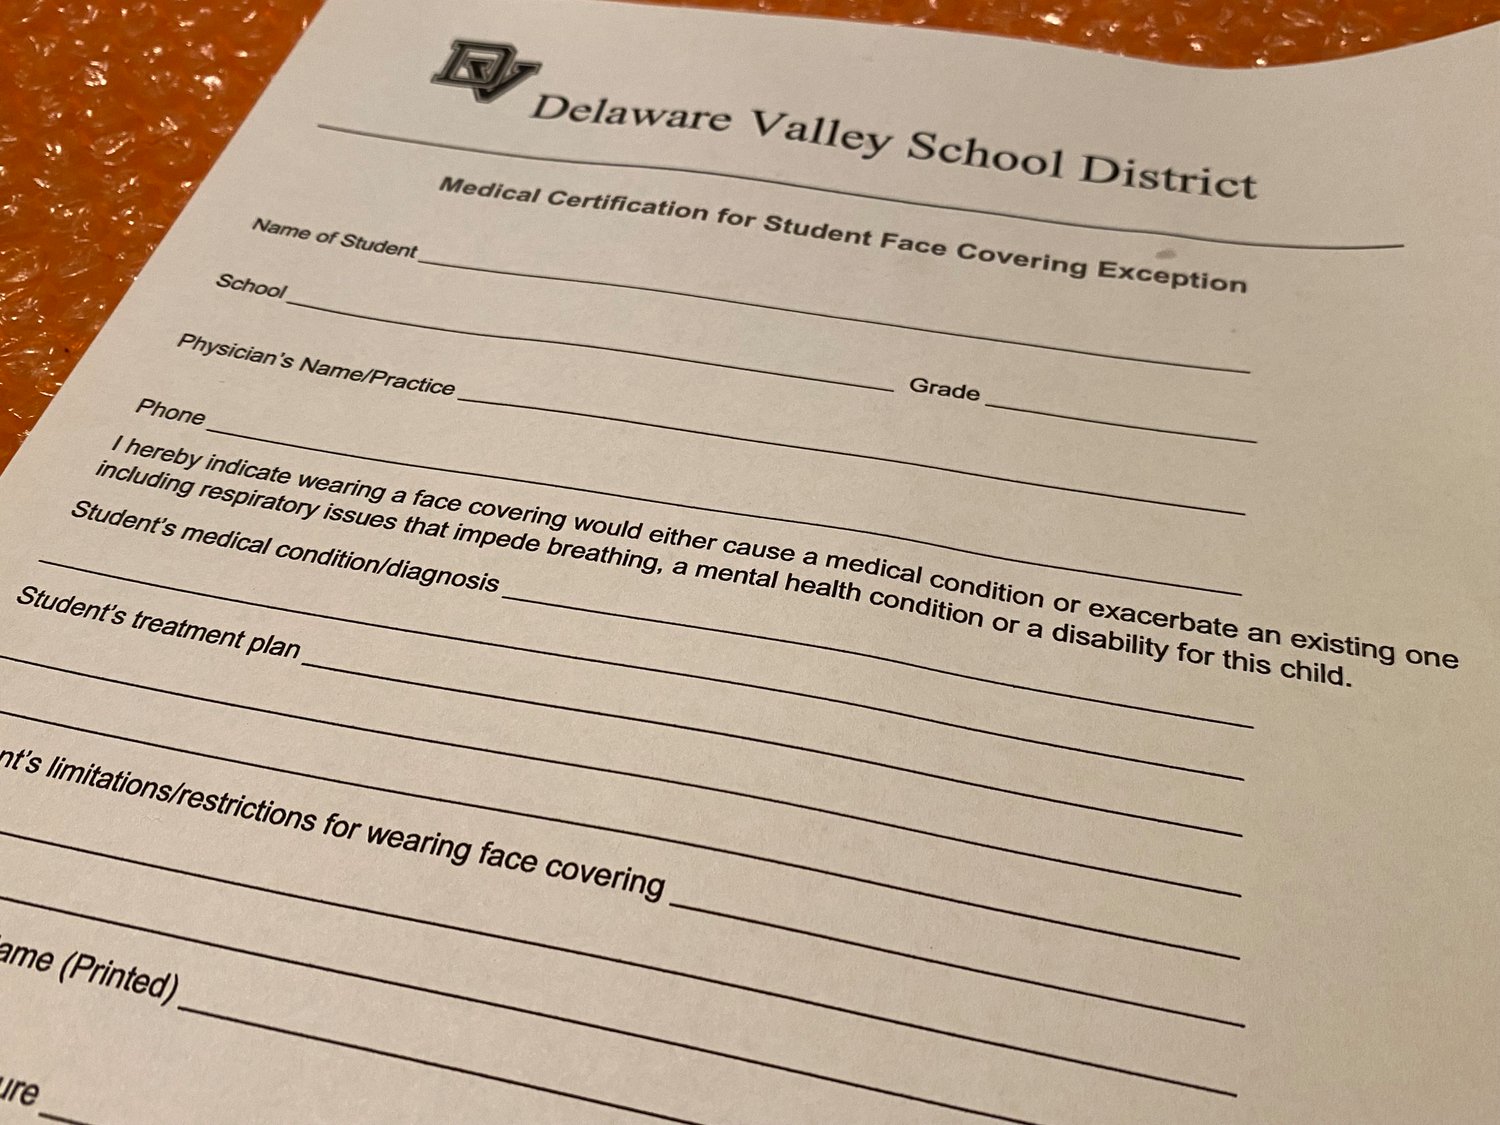 As of October 22, all mask exceptions in the Delaware Valley School District must have medical certification.